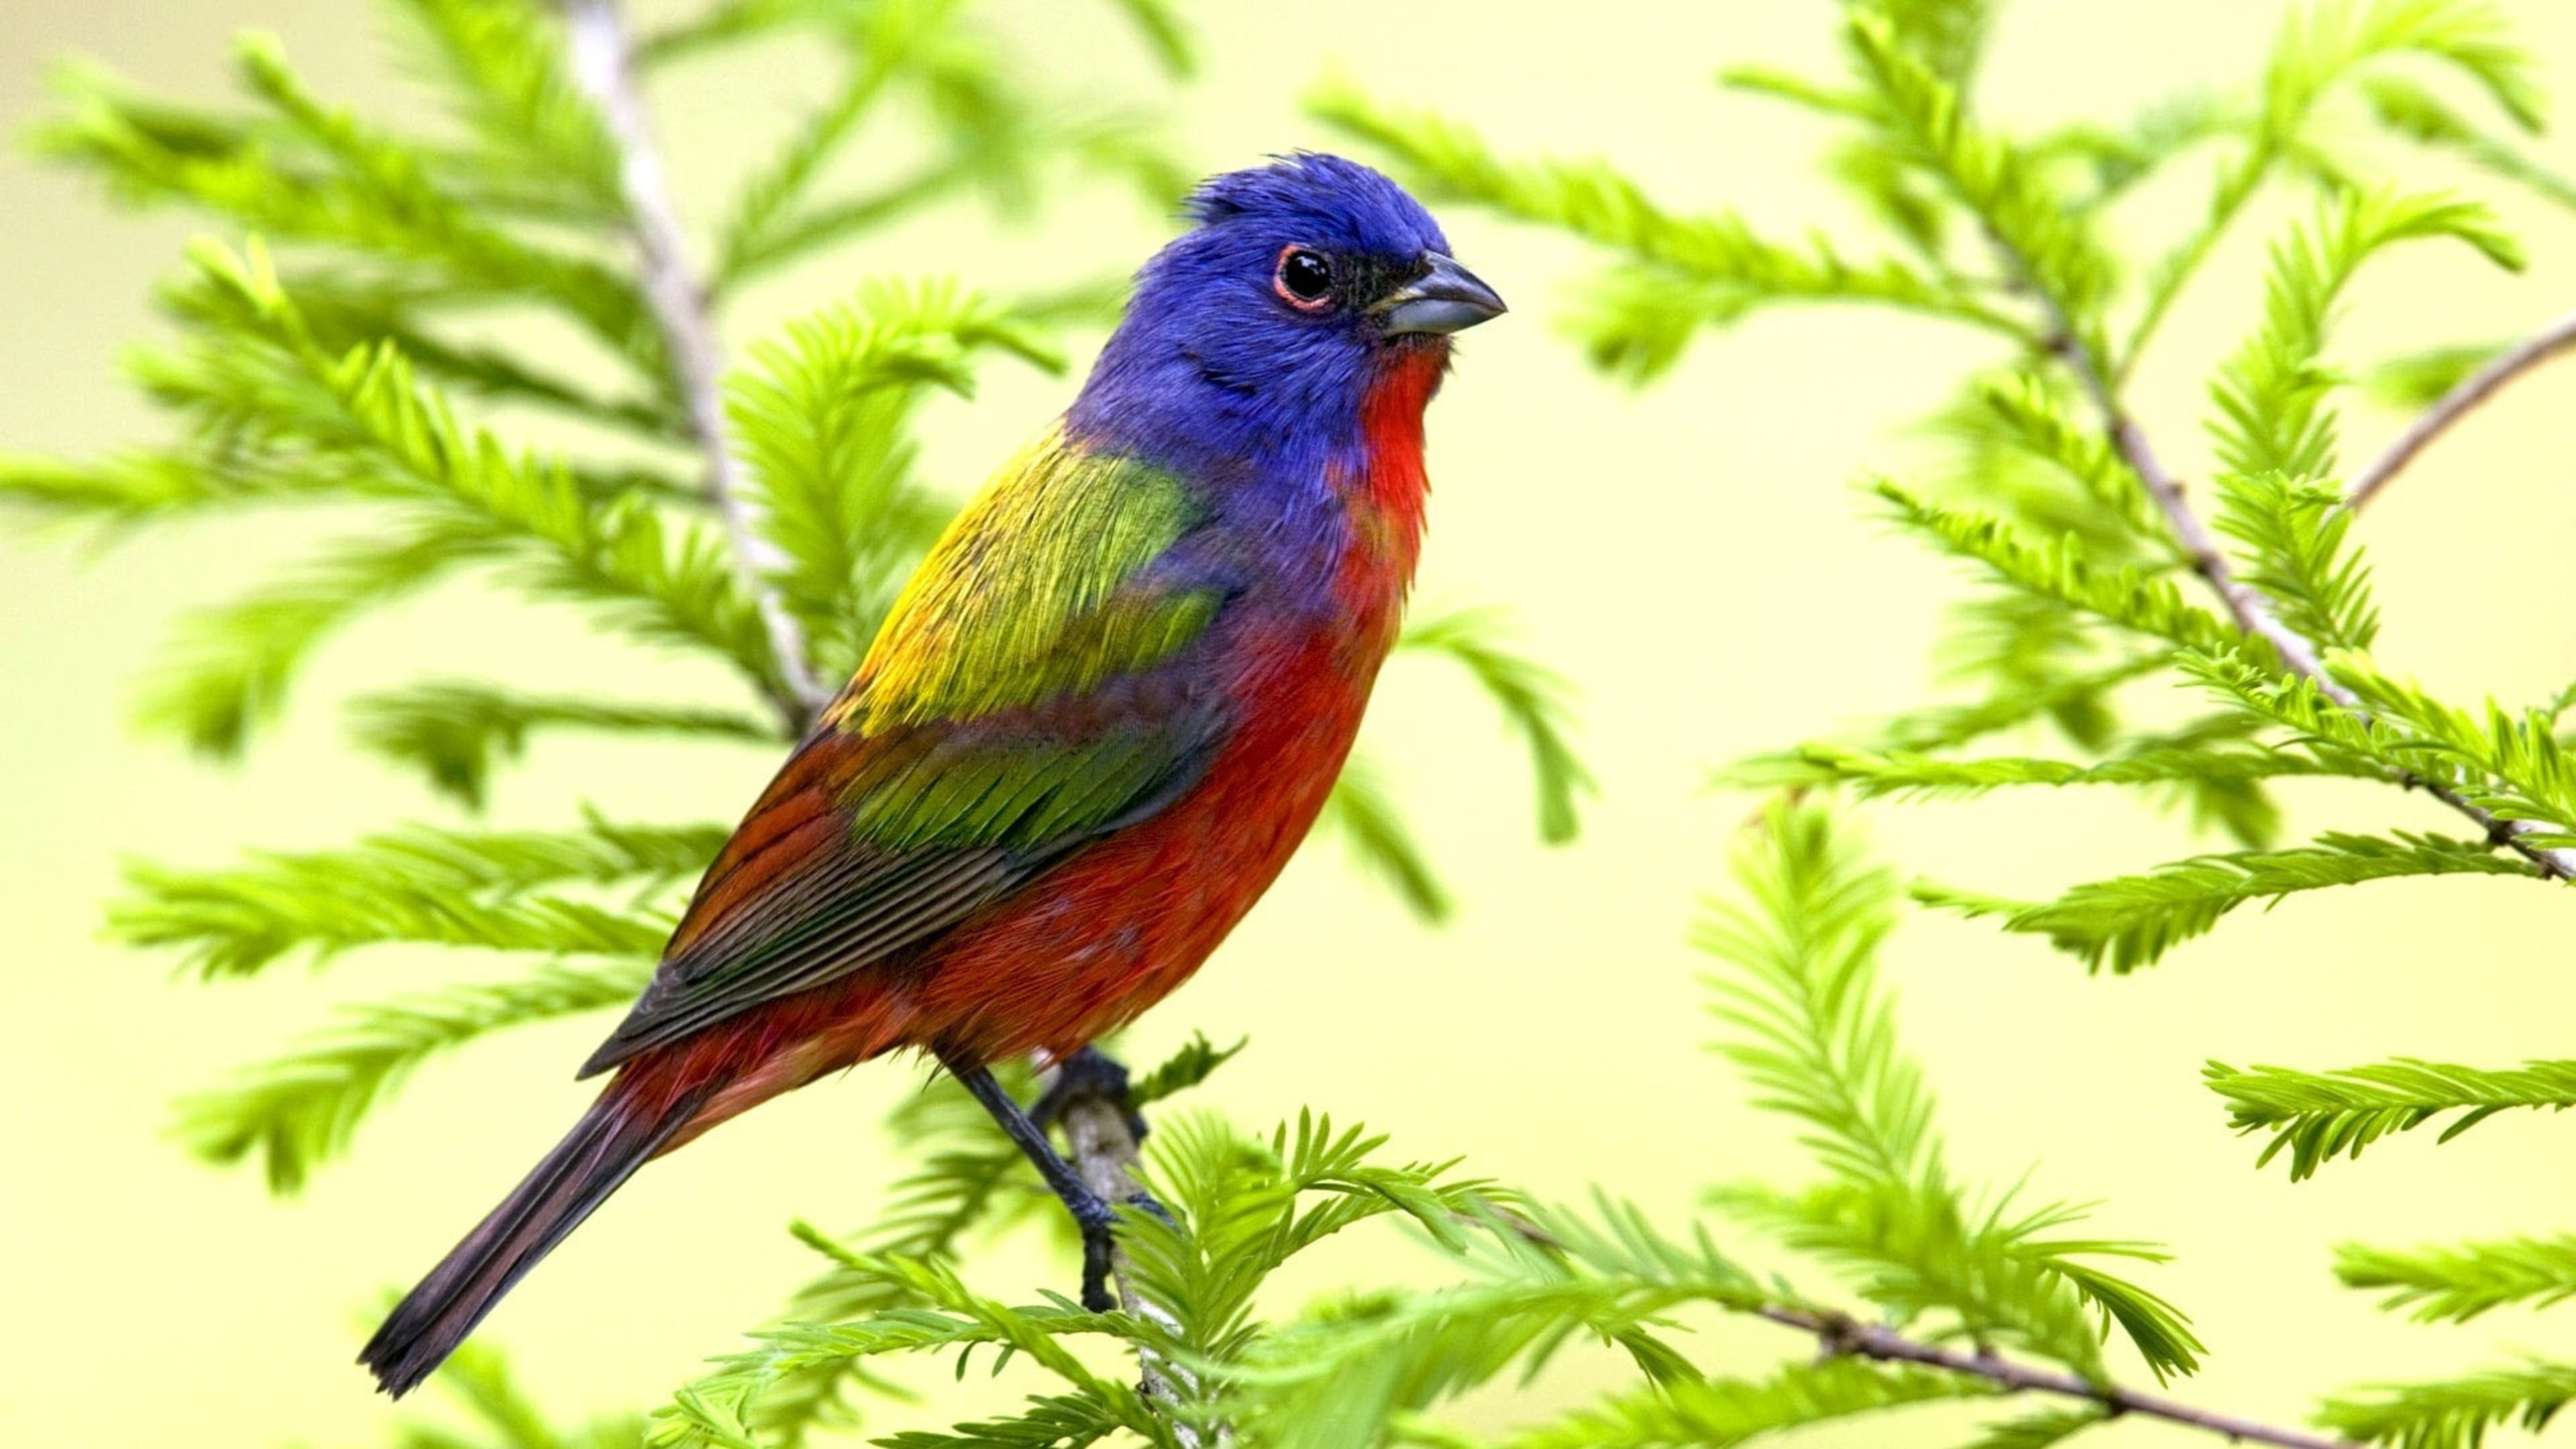 Violet Red Green Yellow Parrot On Leafed Tree Branch 4K HD Birds Wallpapers